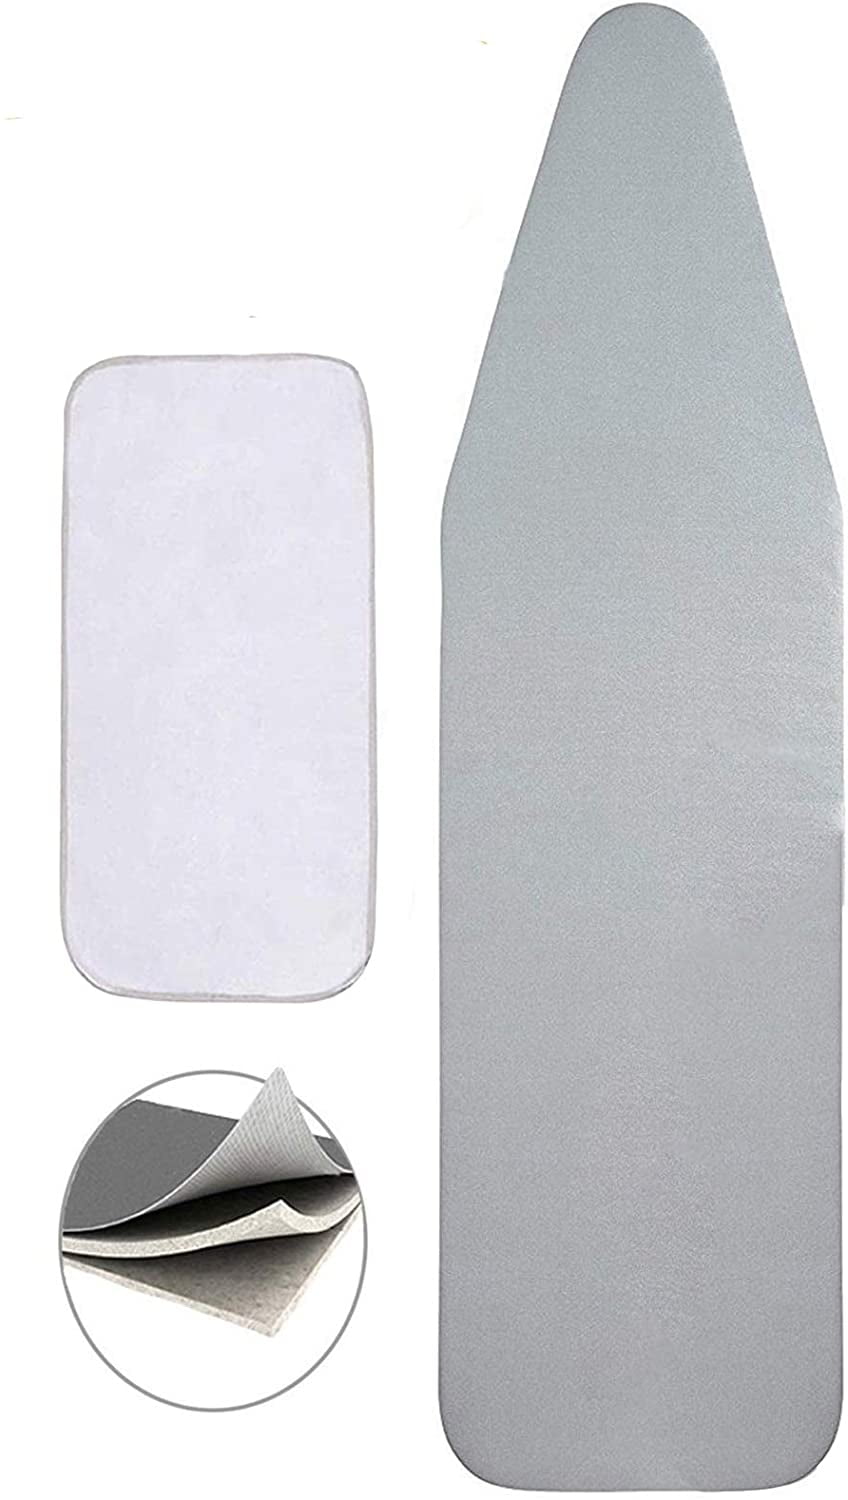 Ironing Board Cover and Pad for Extra Wide 18 x 49 Ironing Boards,Premium Hea... 